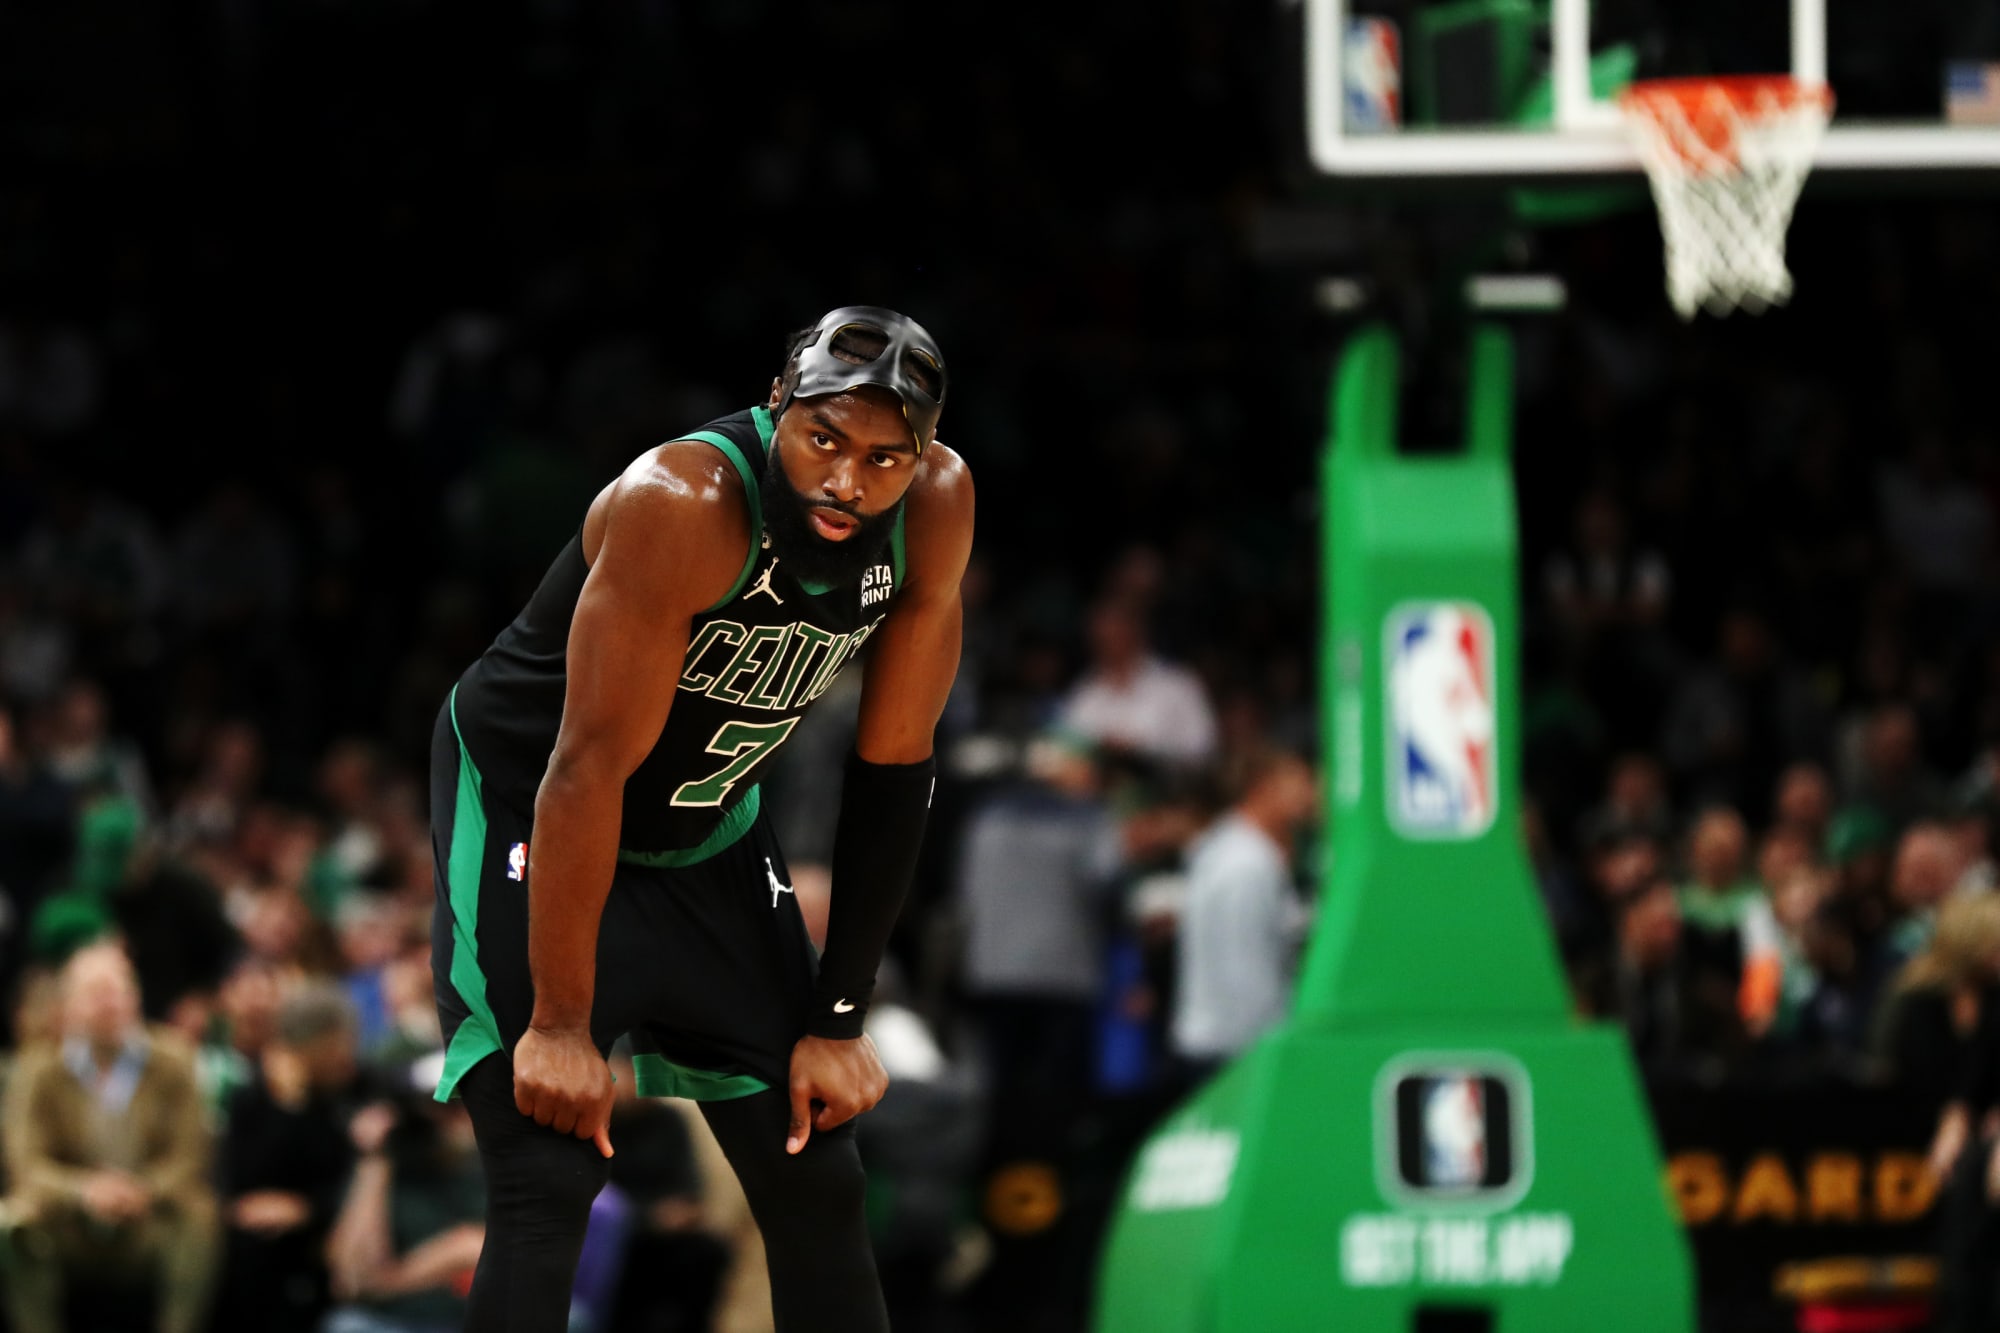 Has Jaylen Brown played his final game for the Boston Celtics?